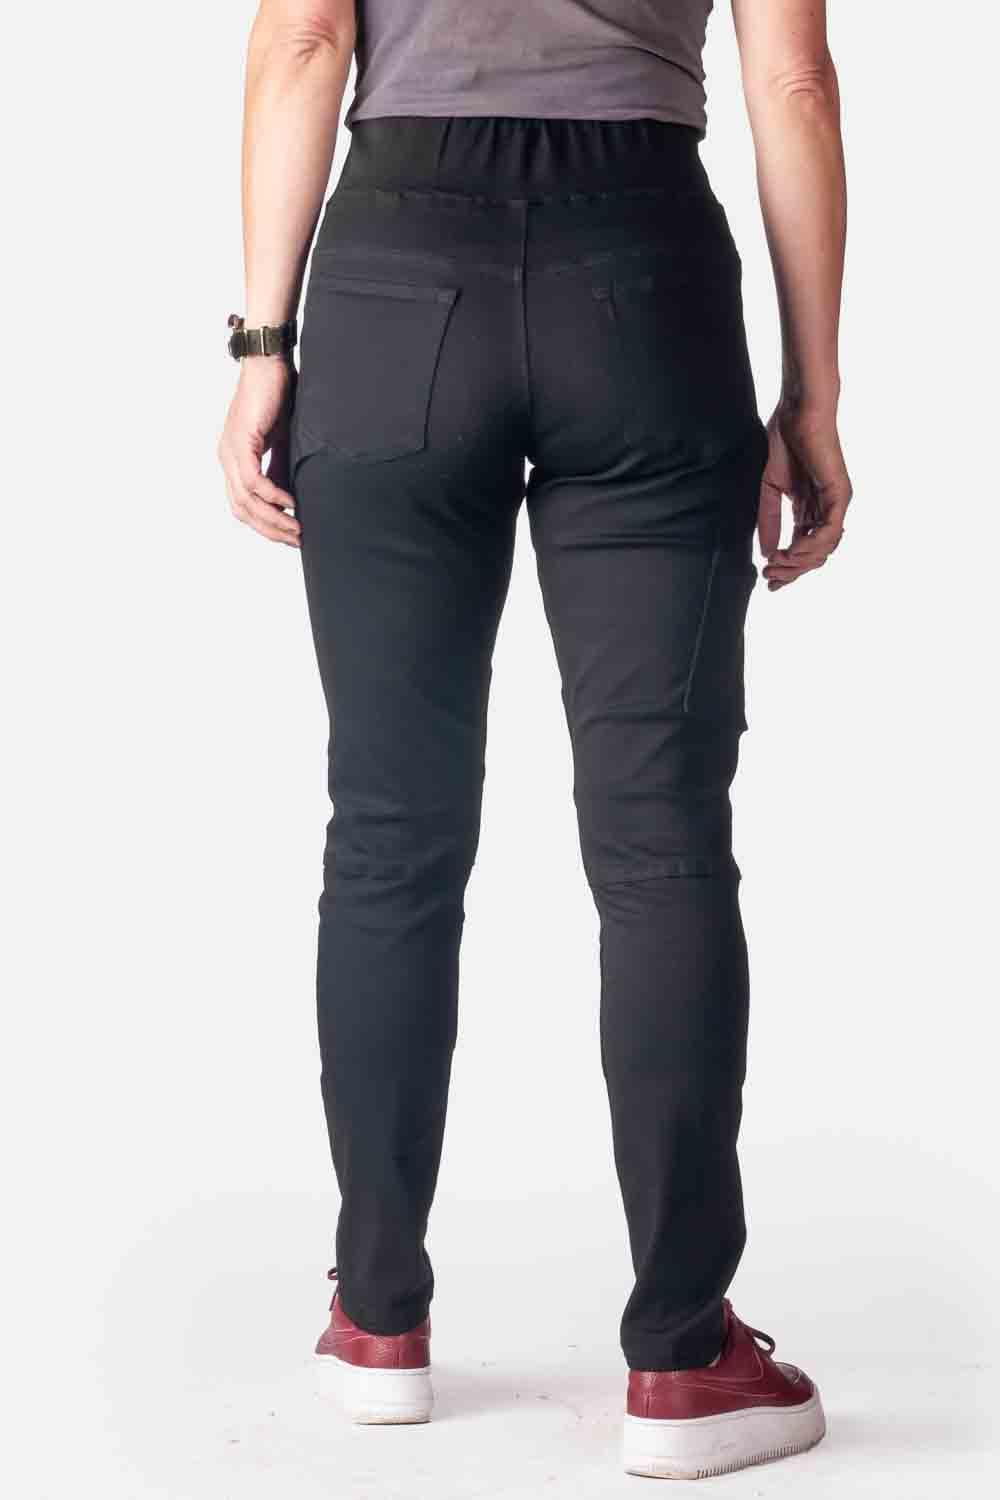 Dovetail Workwear Women's Black Work Pants (2/4 X 31) in the Pants